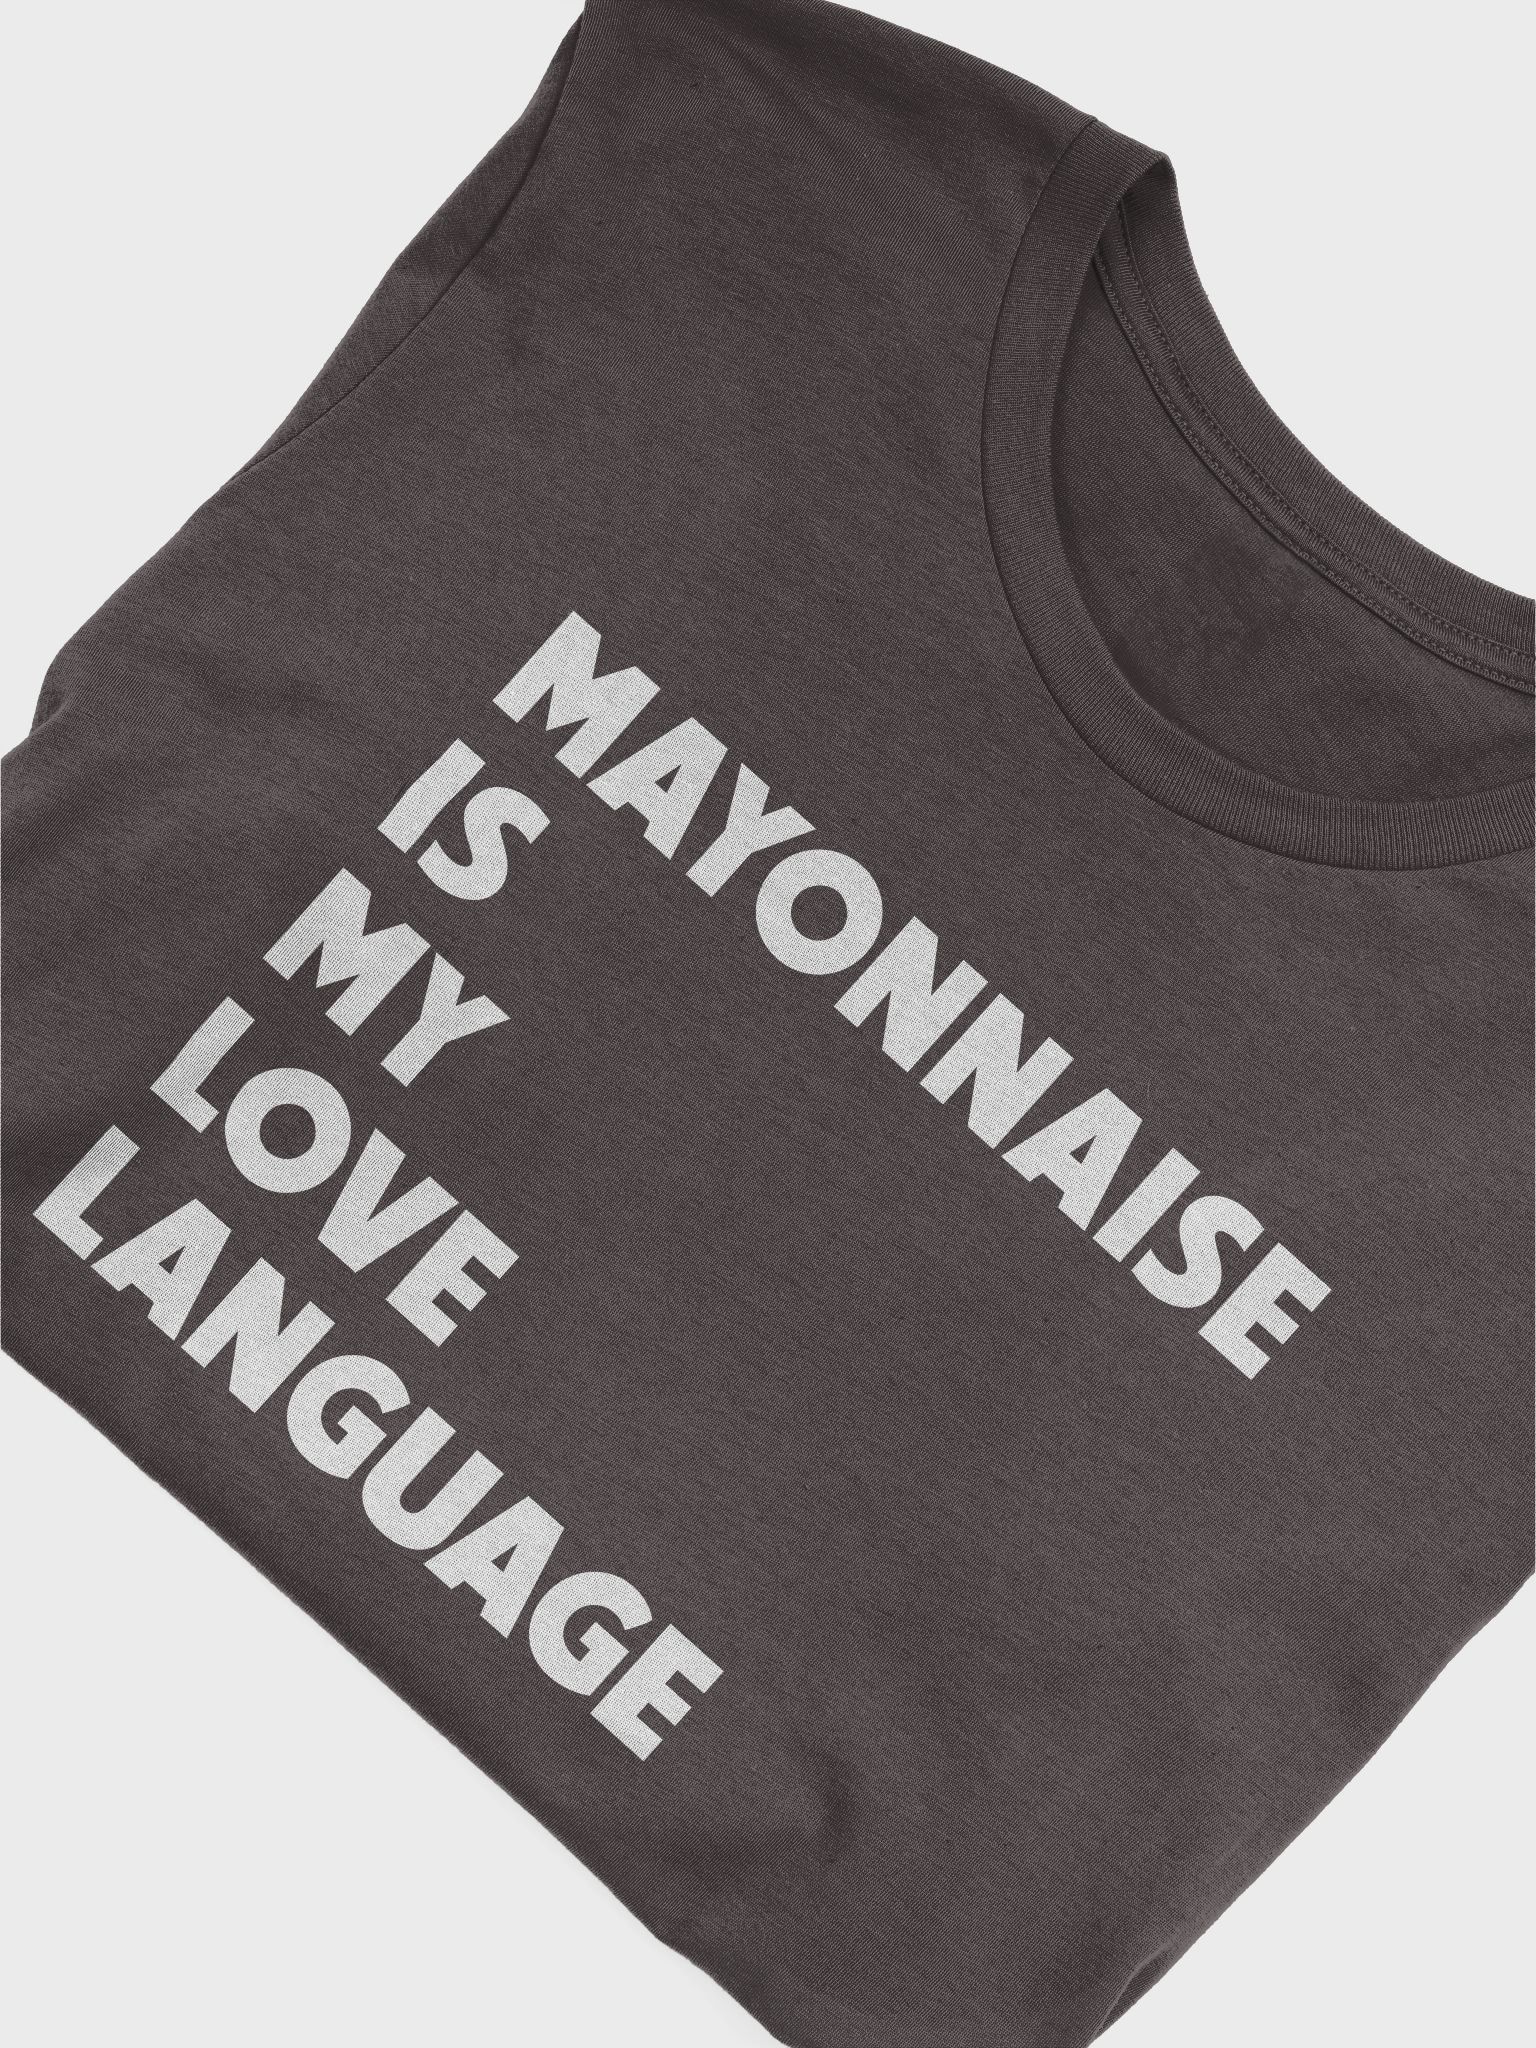 Giving Wedgies Is My Love Language T-shirt